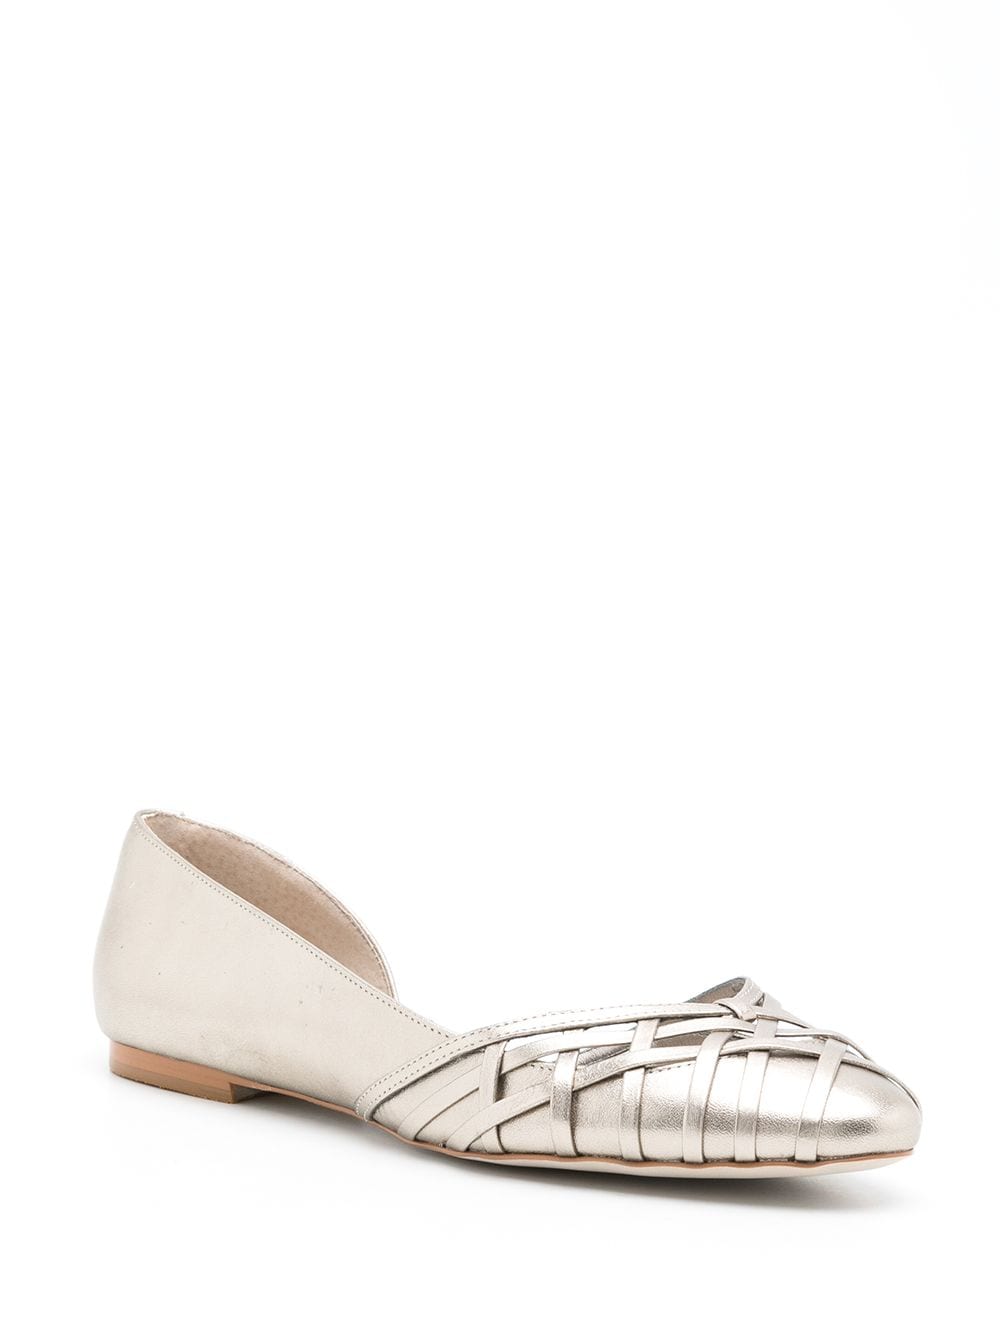 Shop Sarah Chofakian Victoria Leather Ballerina Shoes In Silver